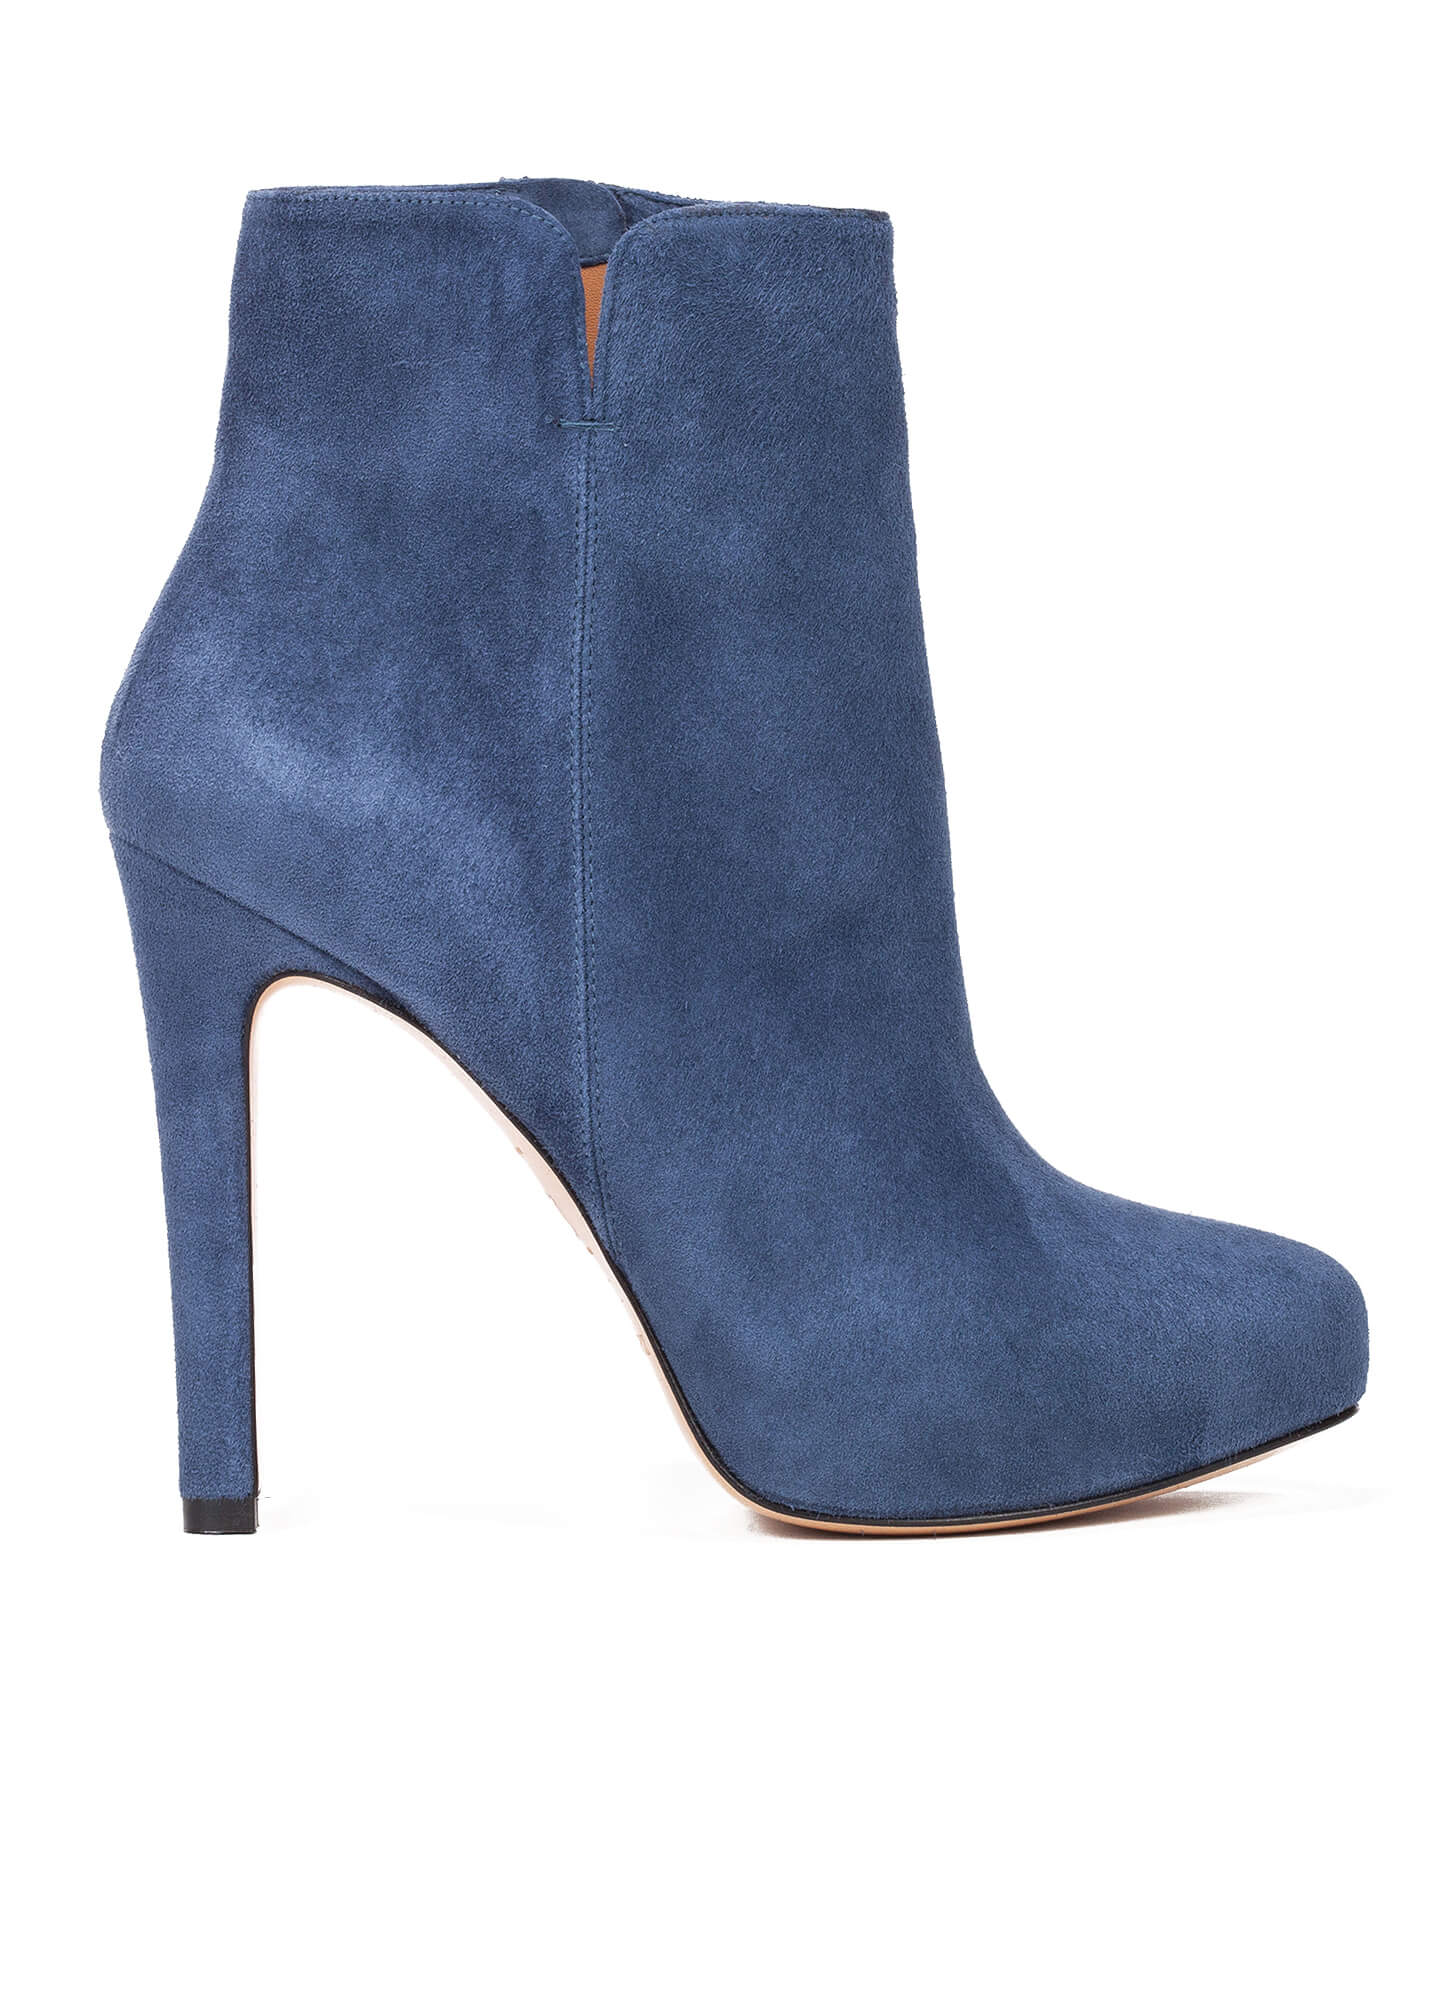 High heel ankle boots in blue suede - online shoe store Pura Lopez ...